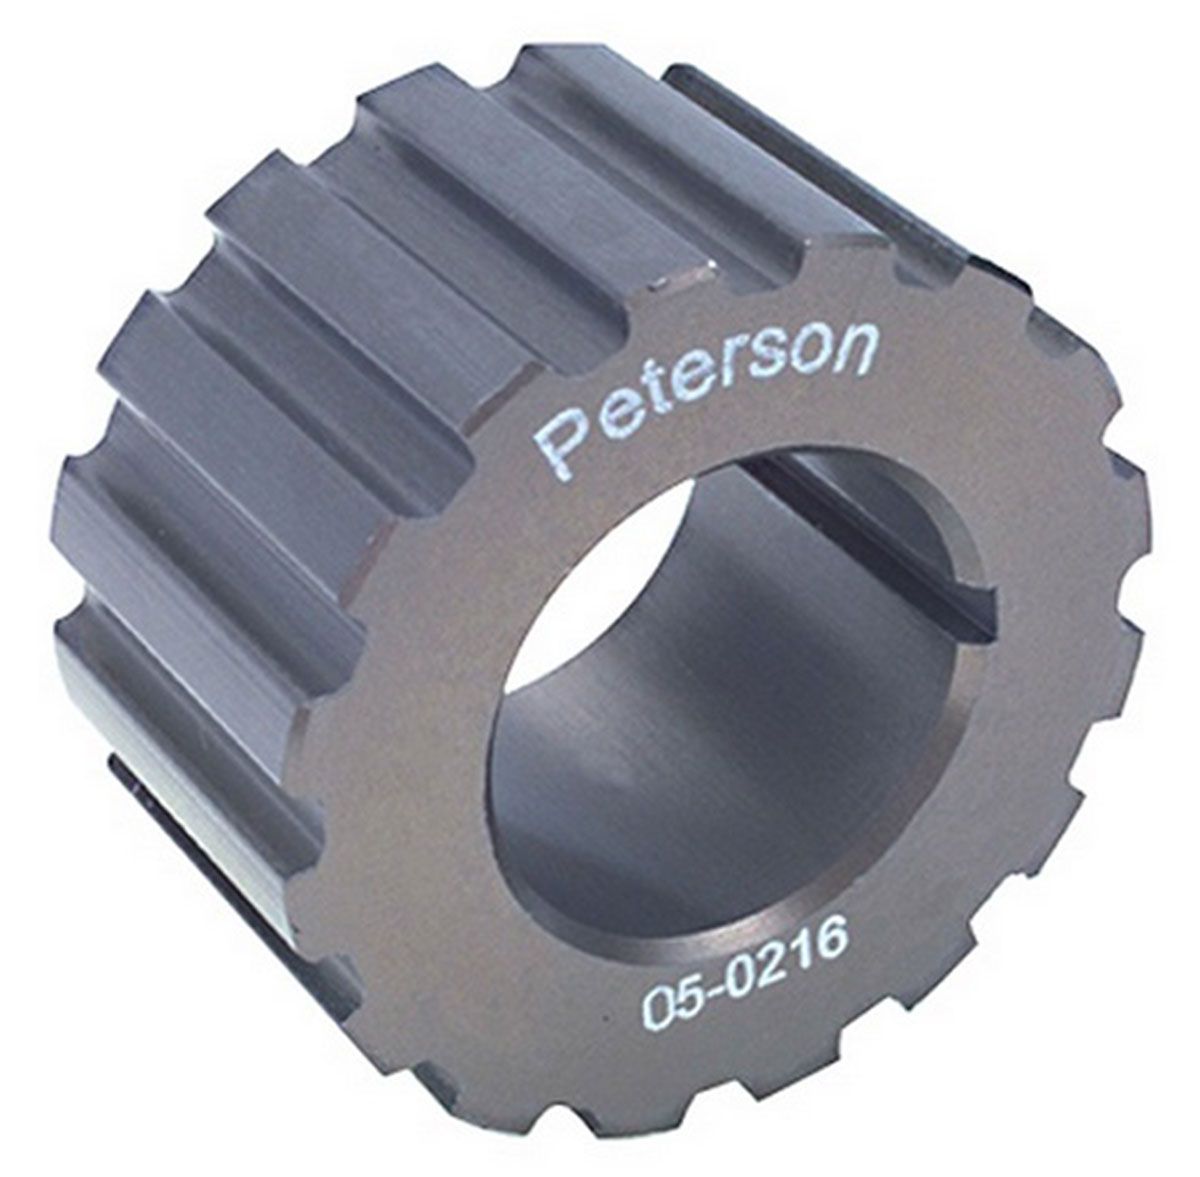 PFS05-0214 - CRANK / GILMER PULLEY 14 TOOTH